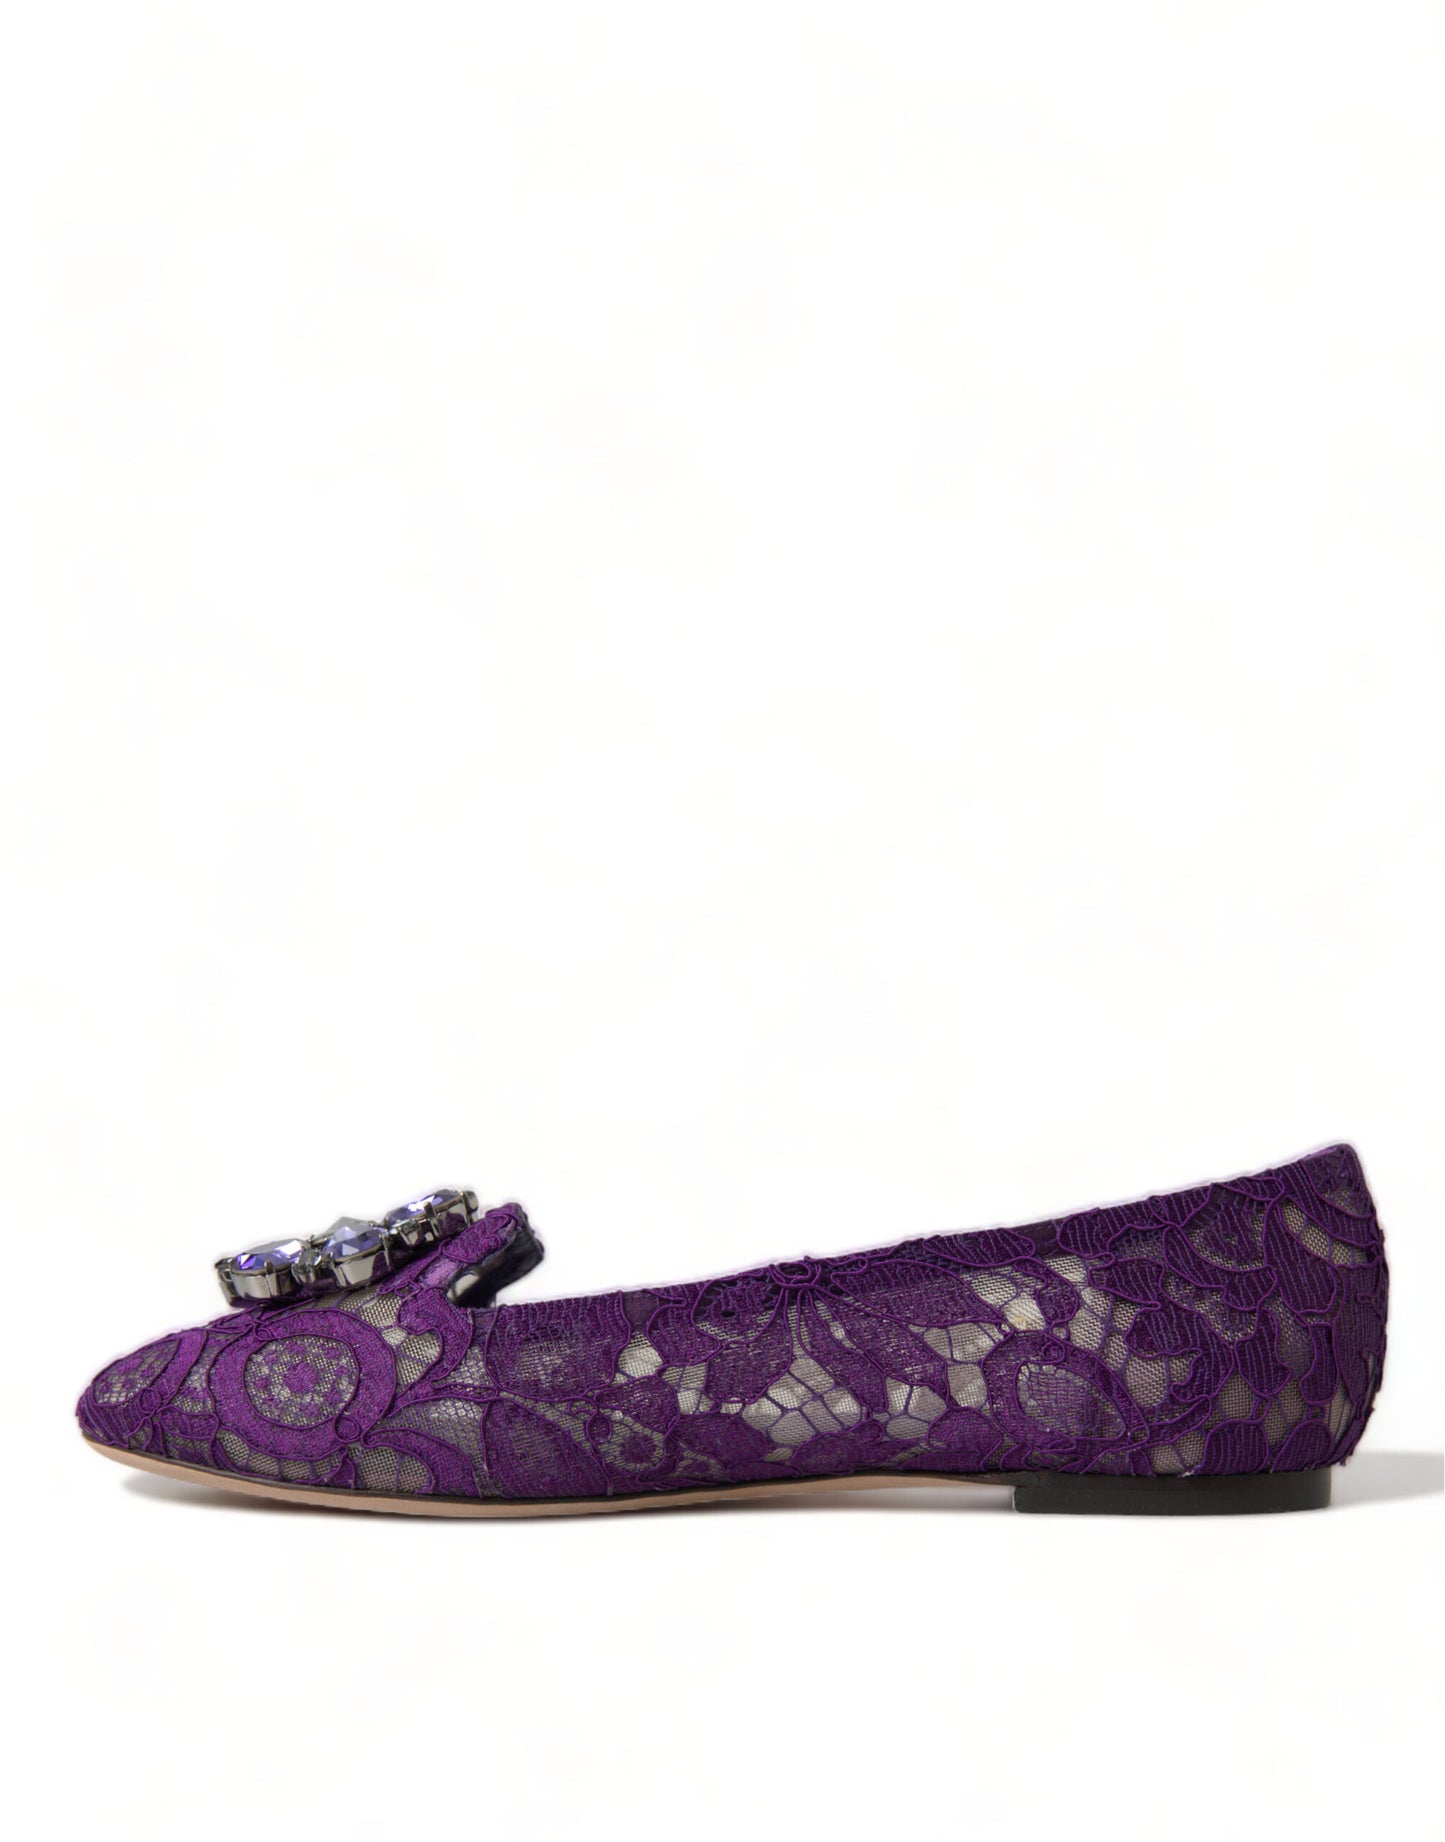 Dolce & Gabbana Elegant Floral Lace Vally Flat Shoes